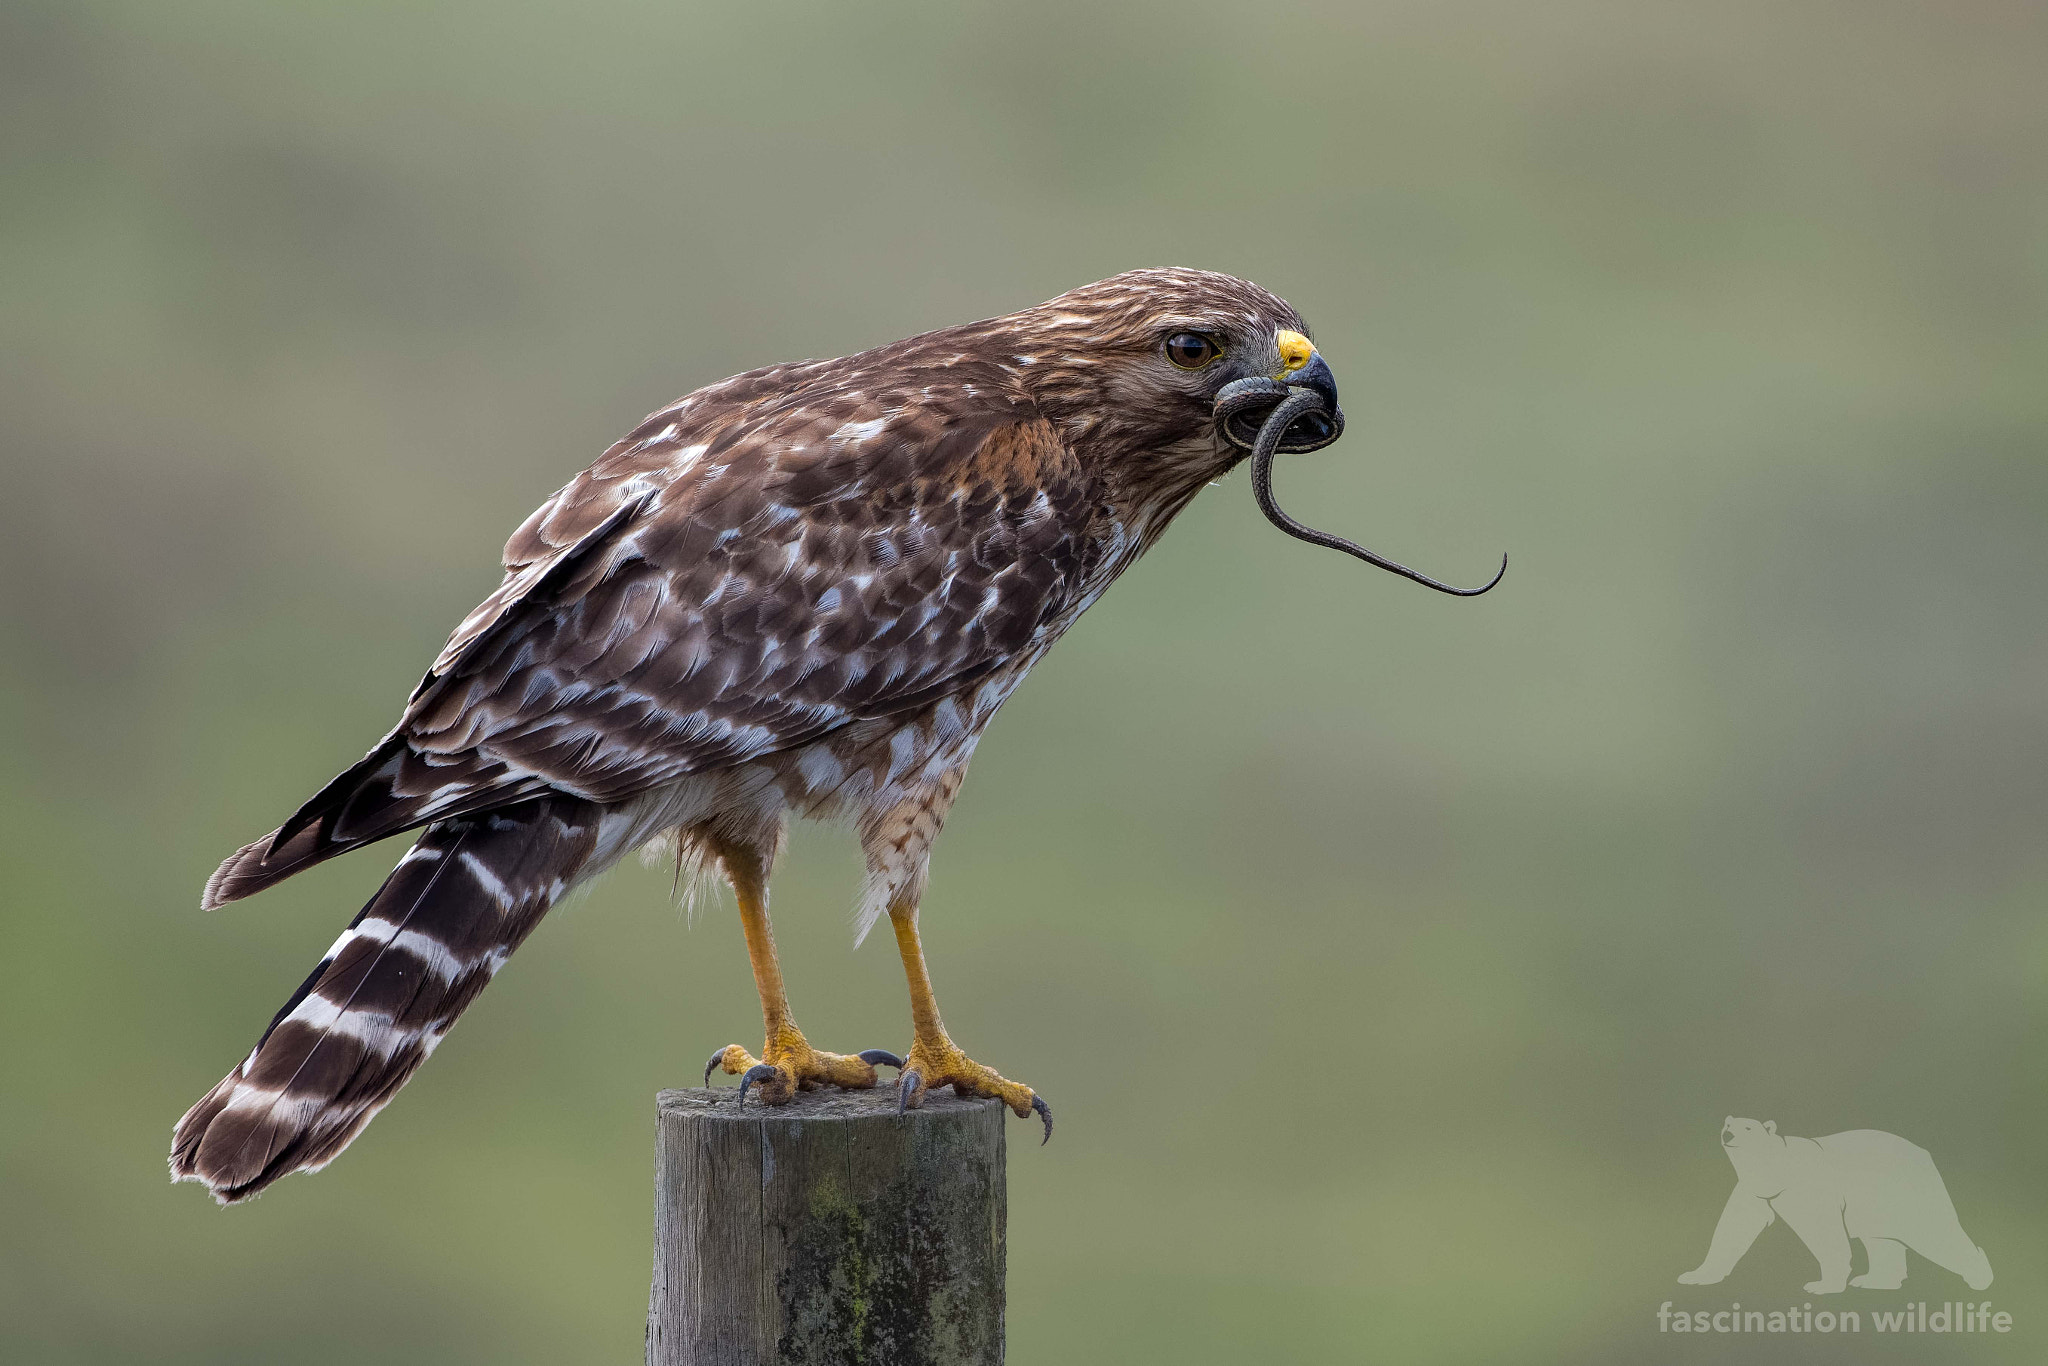 Nikon D850 + Sigma 150-600mm F5-6.3 DG OS HSM | S sample photo. Red shouldered hawk with prey photography